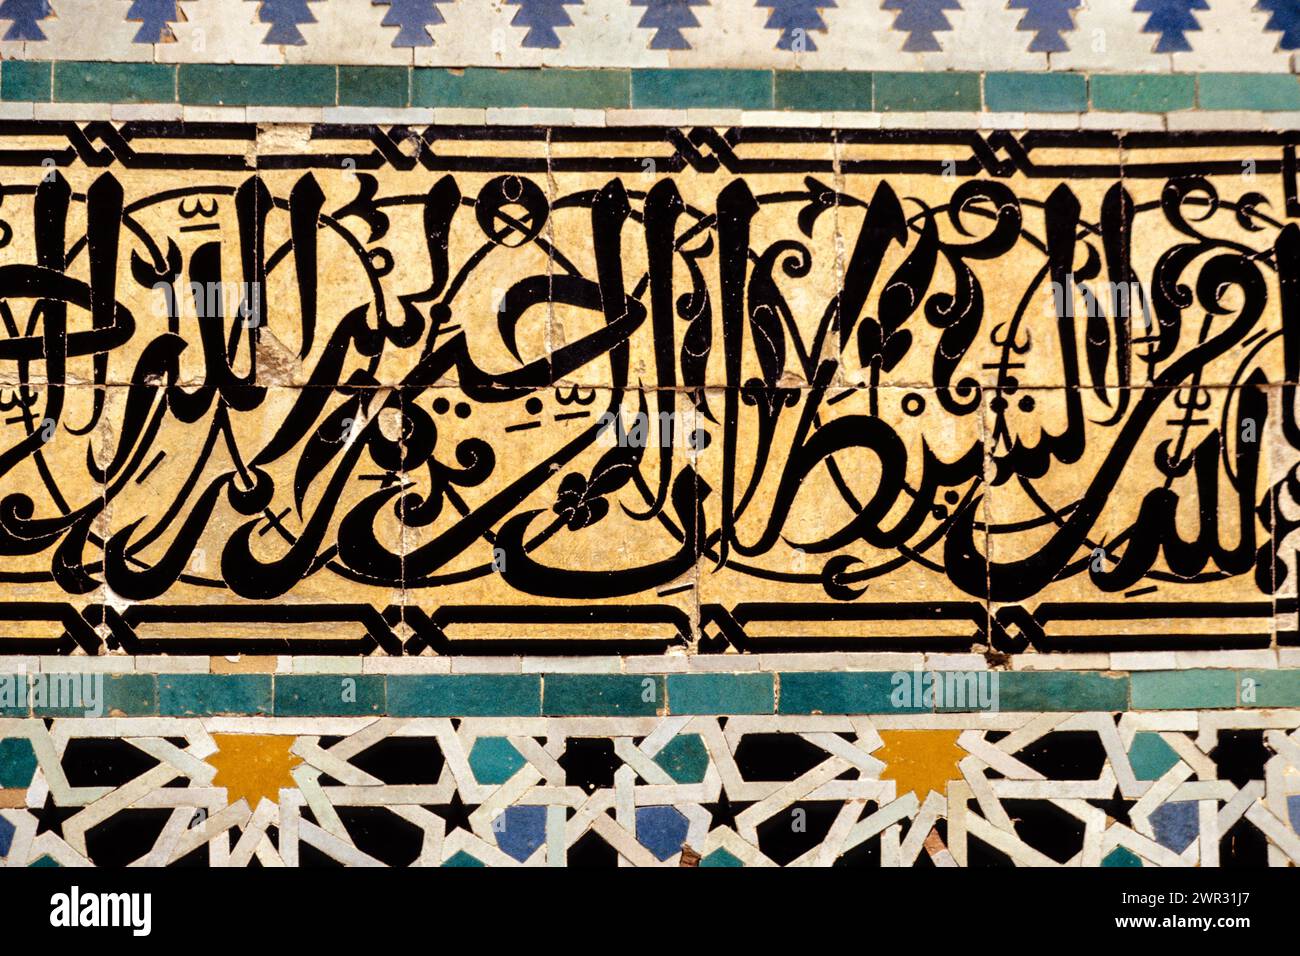 Fez, Marocco - Tile Work and Calligraphy, Bou Inania Medersa, 14°. Secolo. Foto Stock